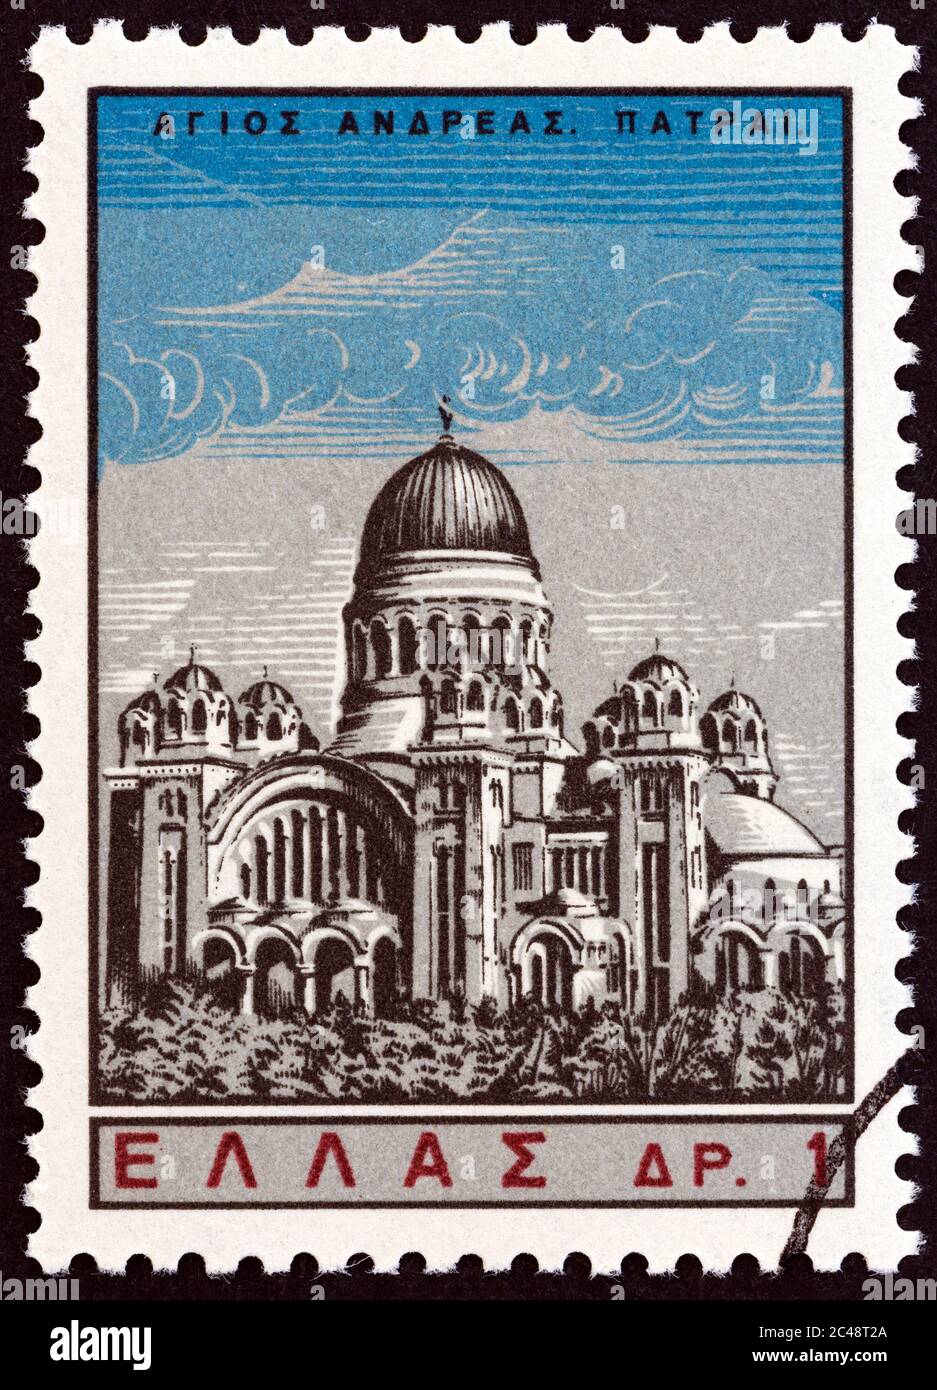 GREECE - CIRCA 1965: A stamp printed in Greece from the 'Saint Andrew' issue shows St. Andrew's church, Patras Stock Photo